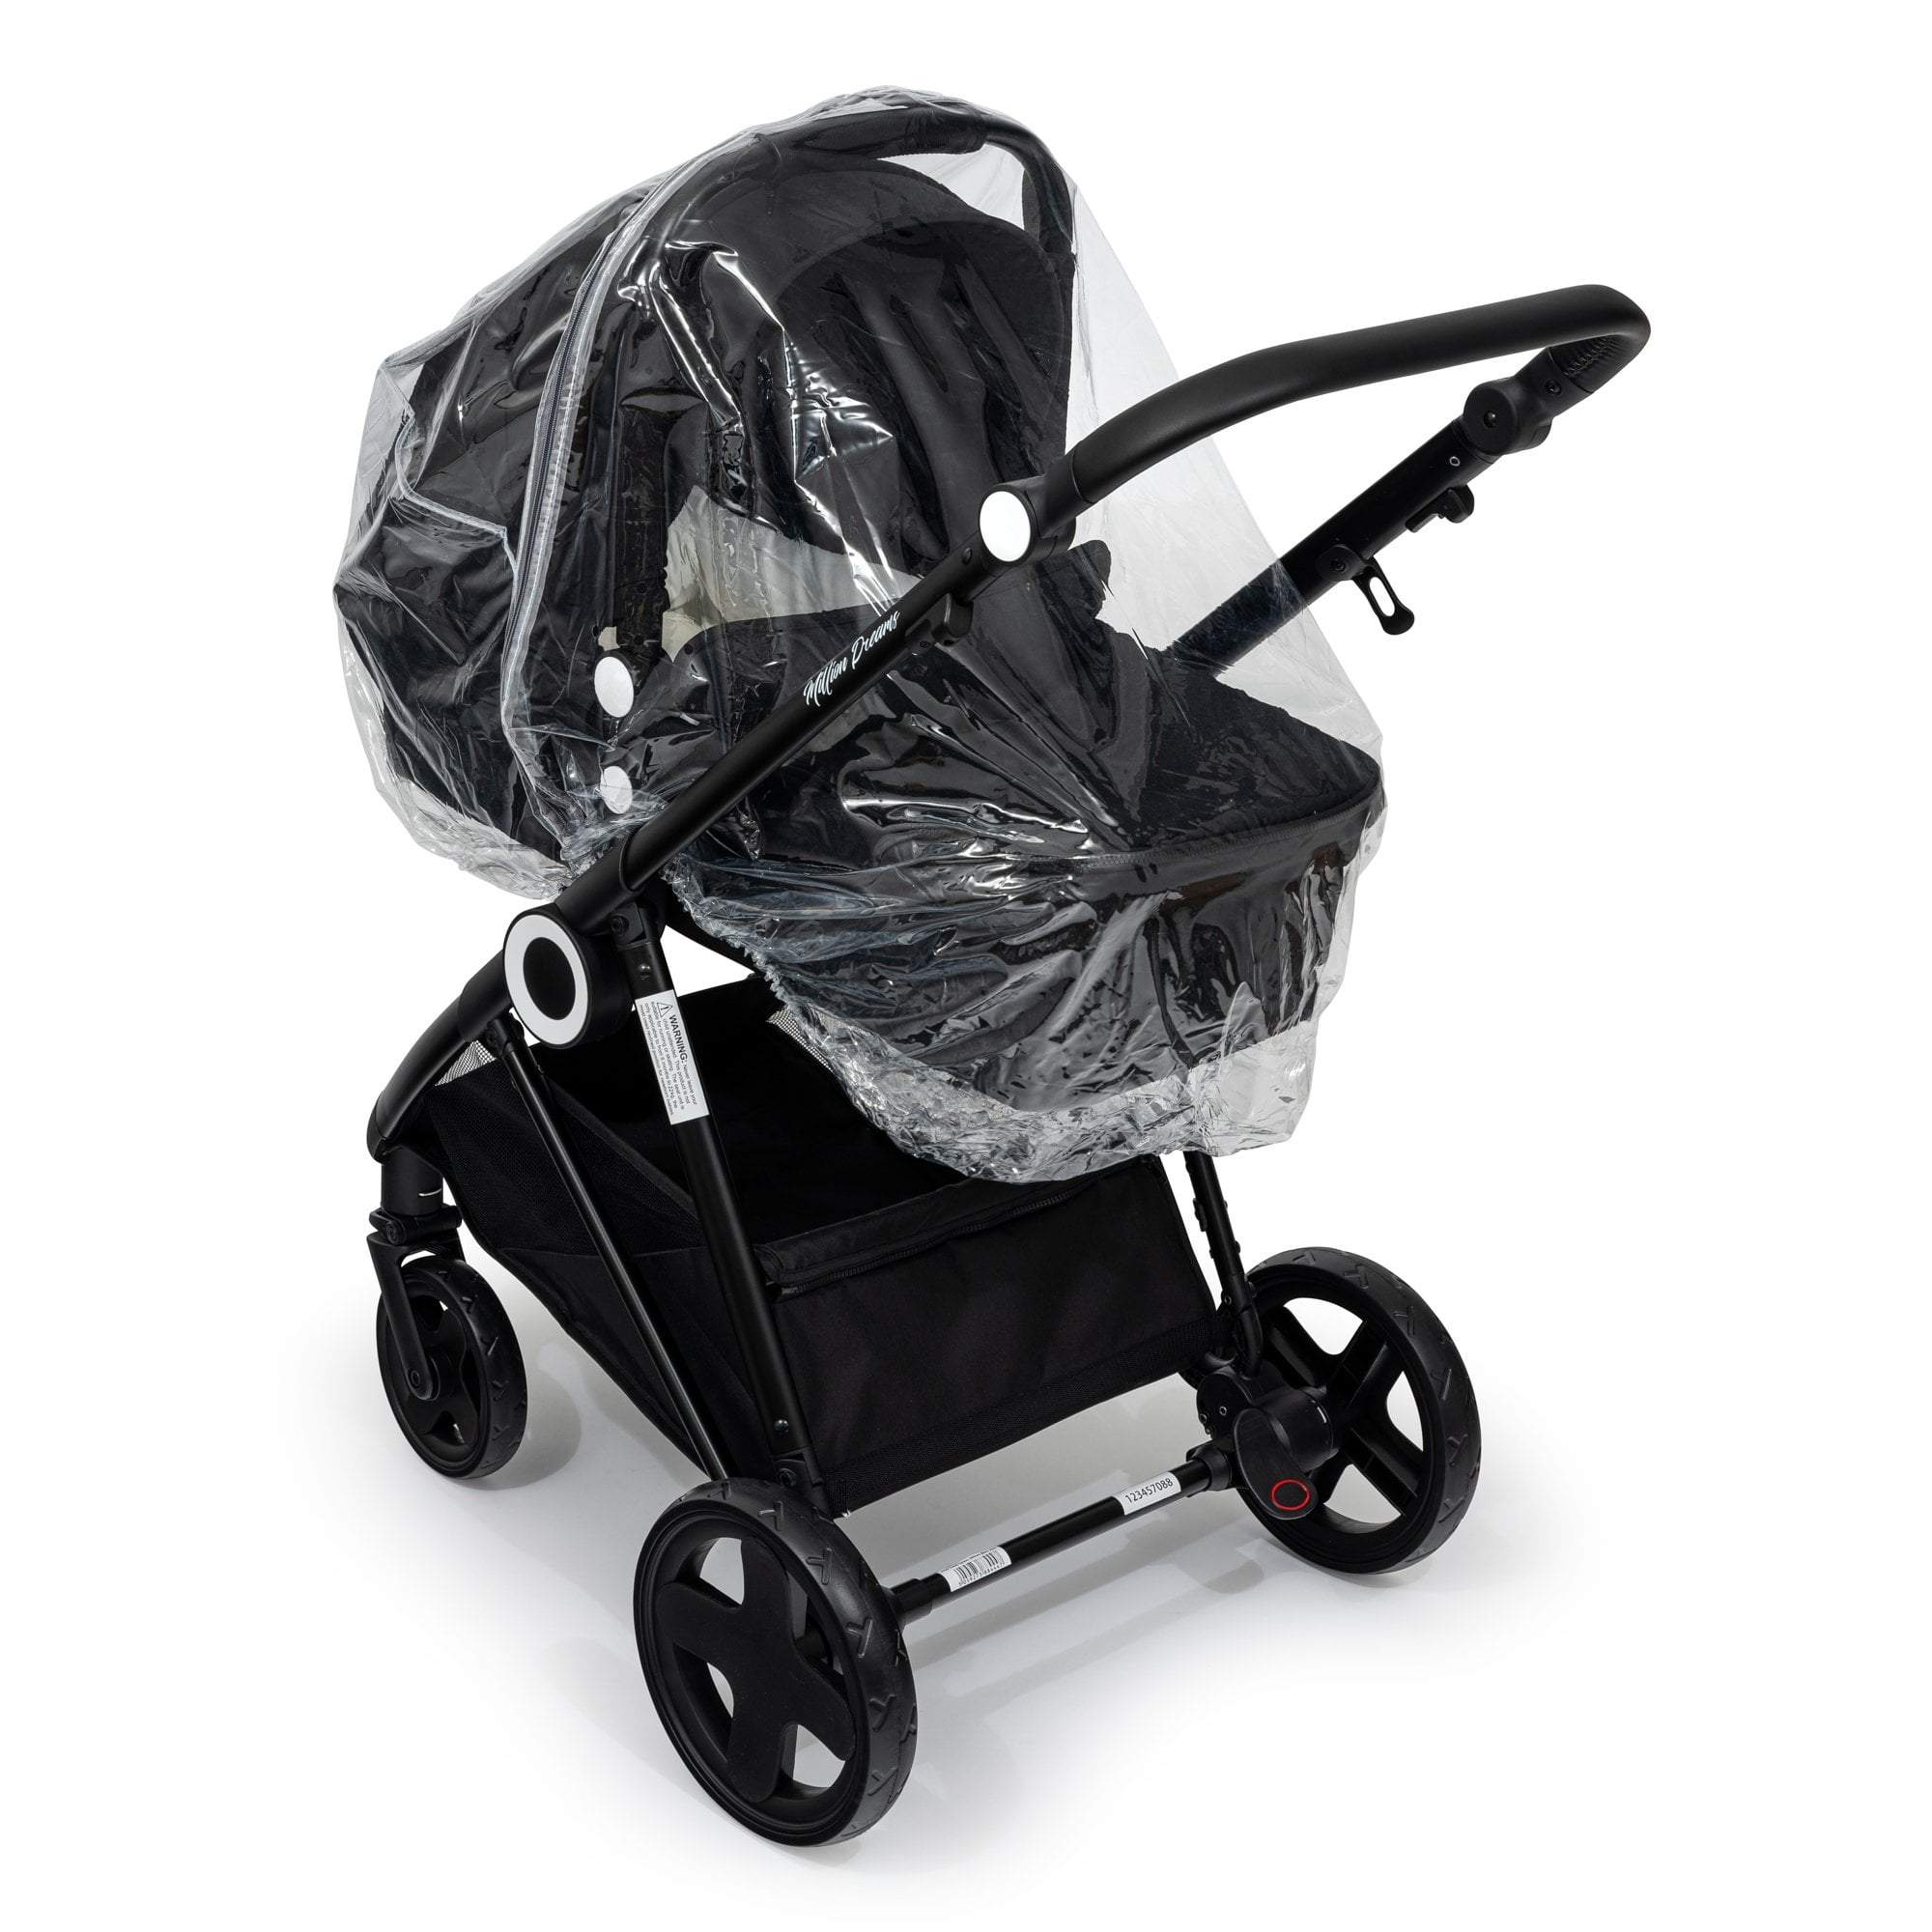 Carrycot Raincover Compatible With Stokke - Fits All Models - For Your Little One